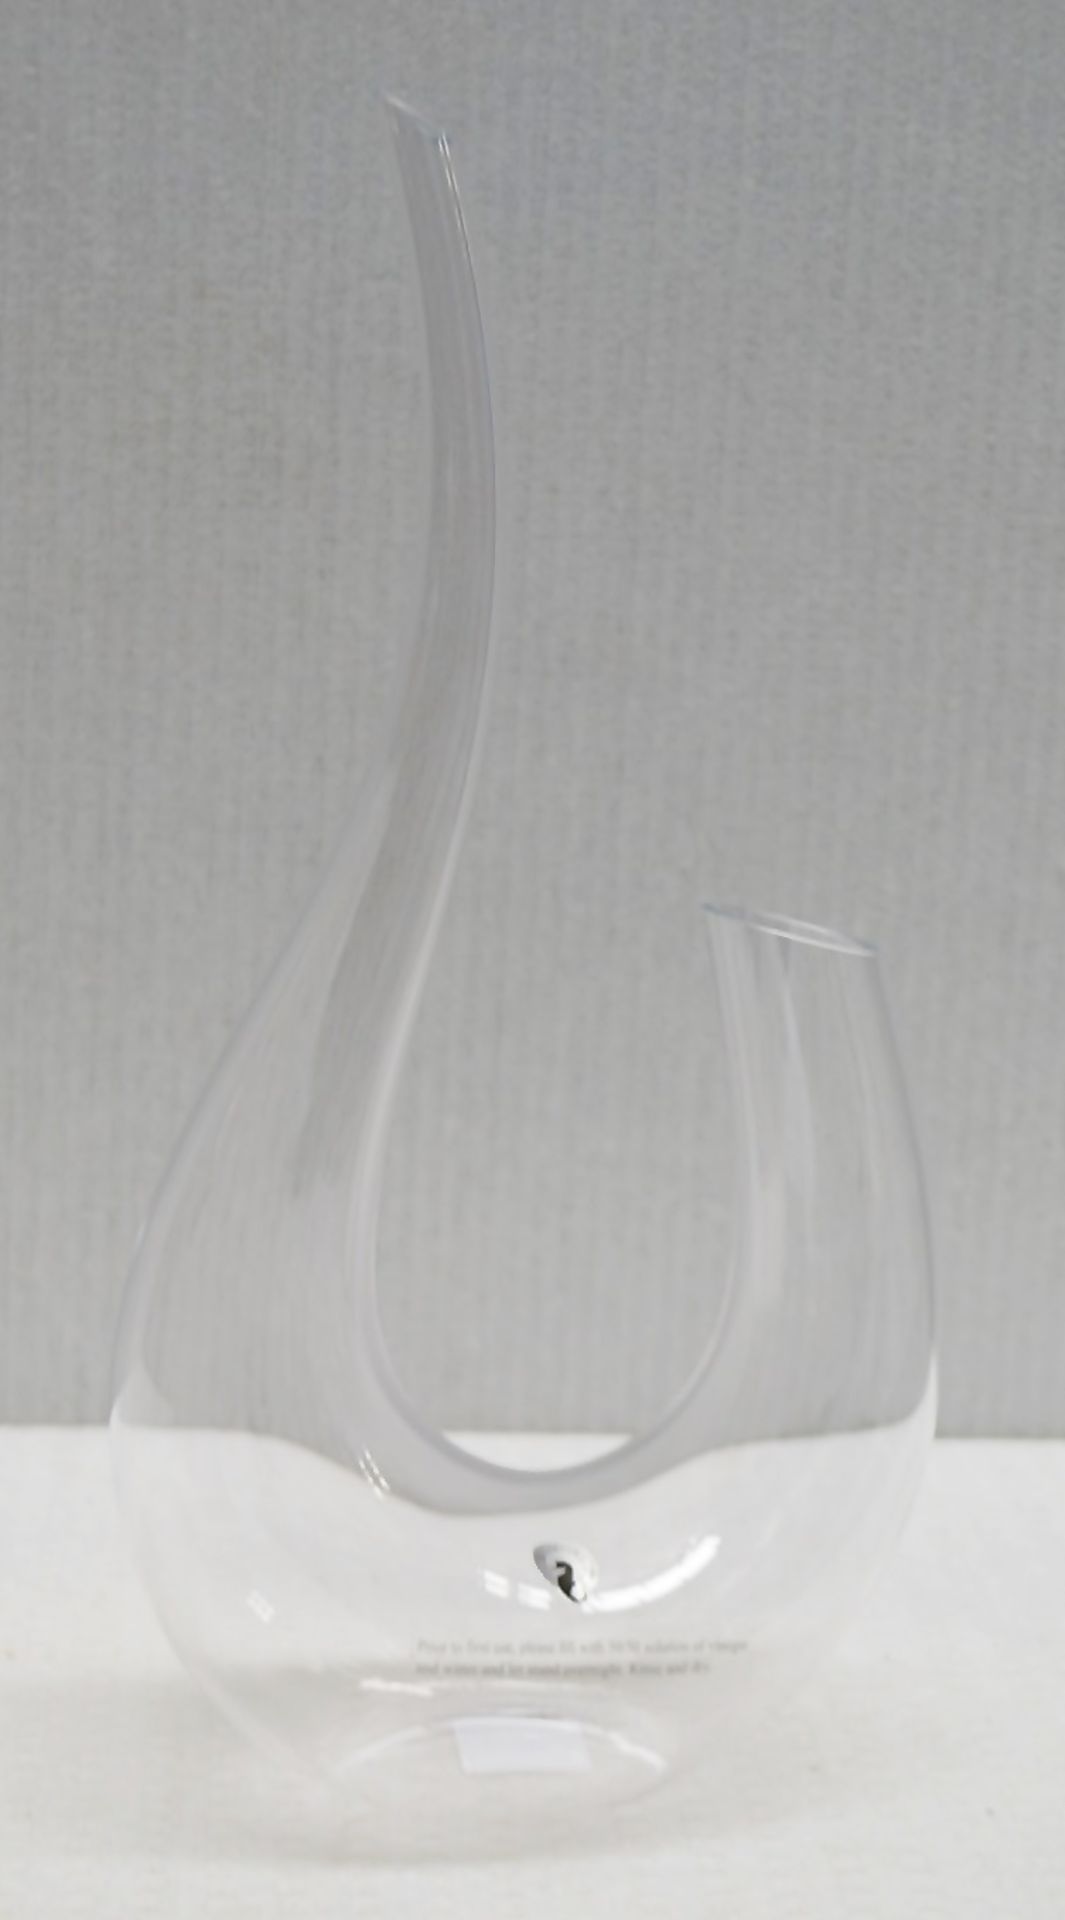 1 x Waterford 'Elegance Tempo' Decanter / Carafe - Ref: HHW77/JUL21 - CL011 - Location: Altrincham - Image 5 of 8